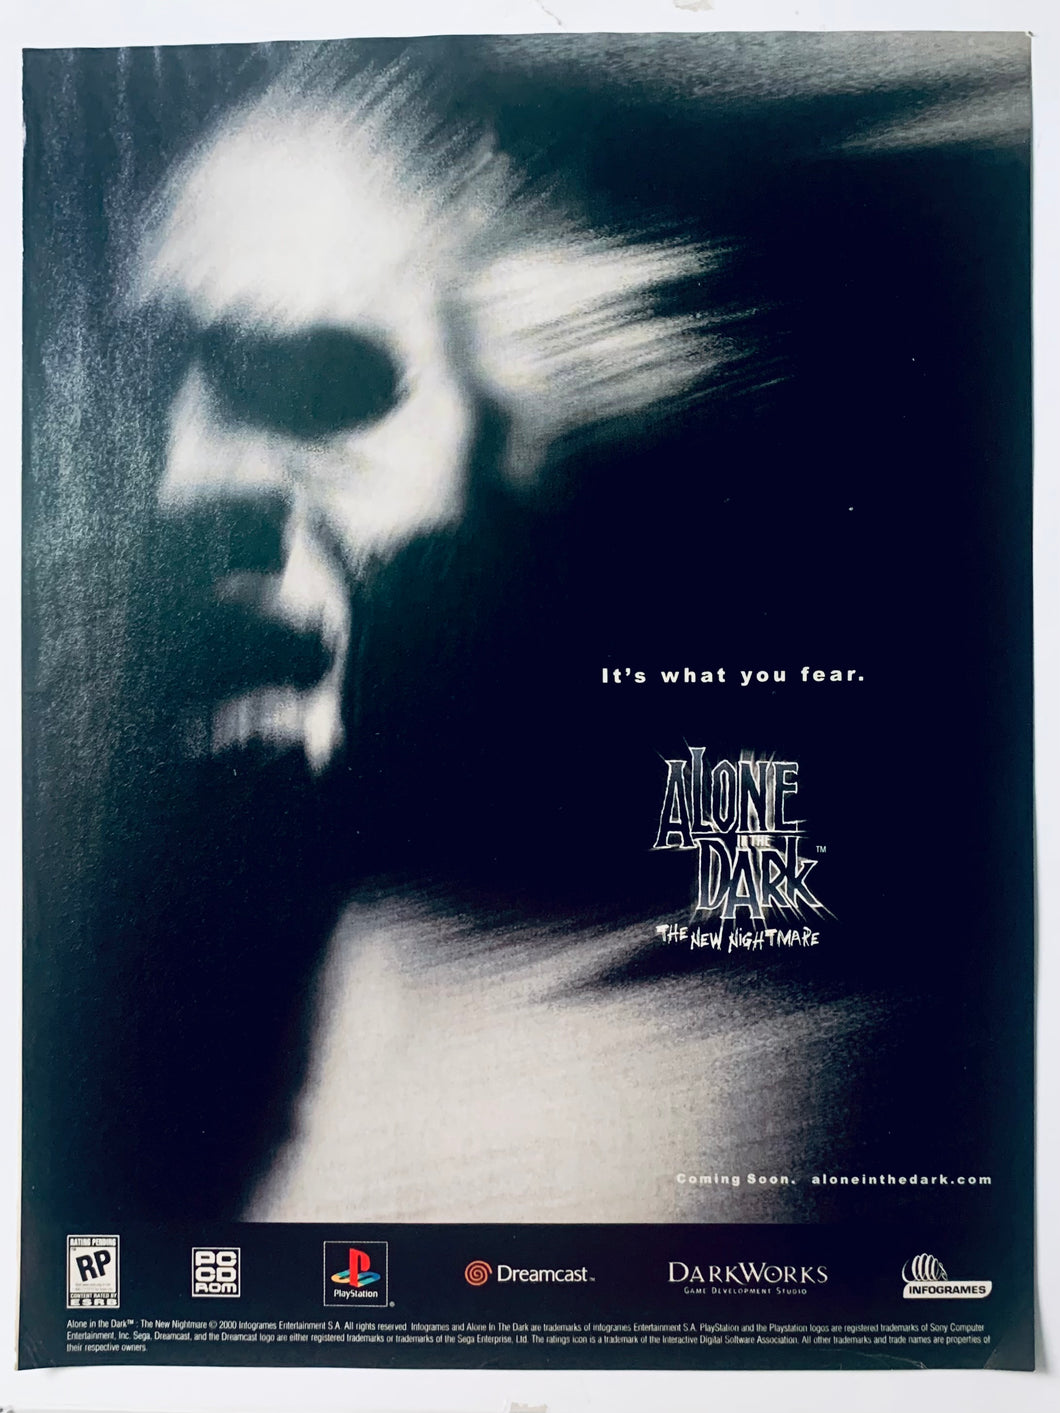 Alone in the Dark: The New Nightmare - PlayStation DC PC - Original Vintage Advertisement - Print Ads - Laminated A4 Poster